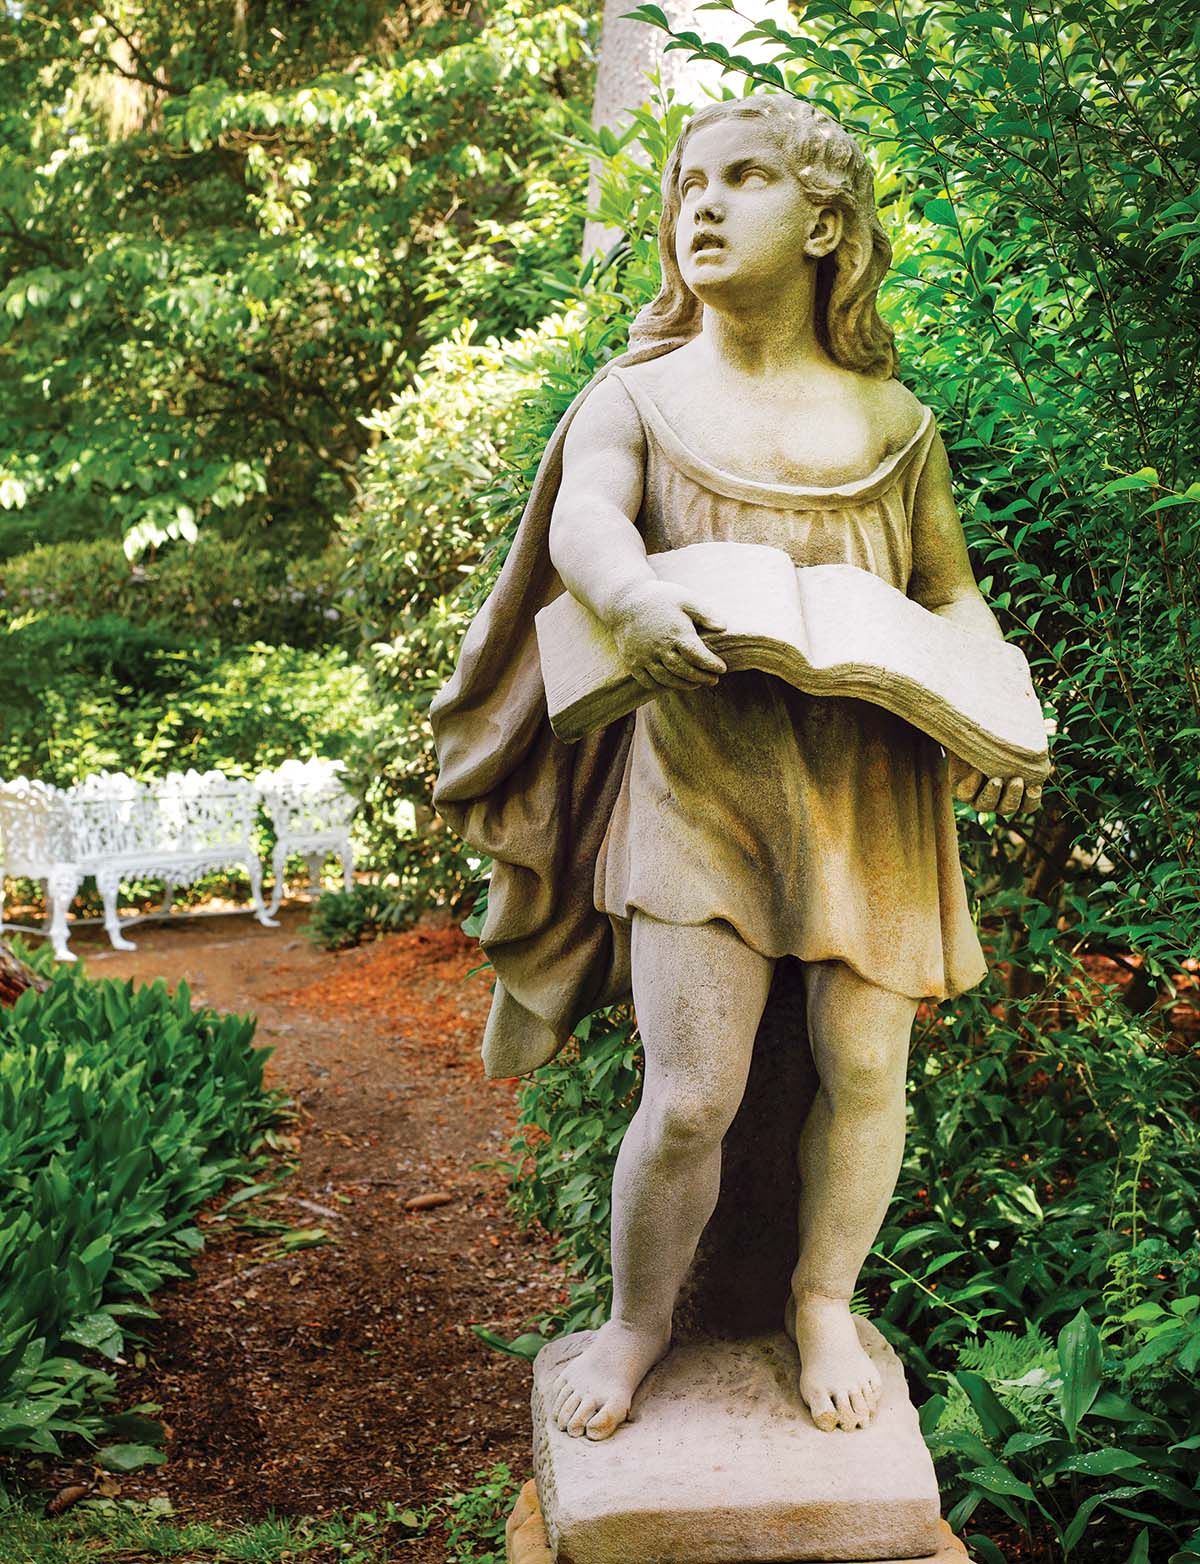 A statue of a child holding a book stands in the garden.